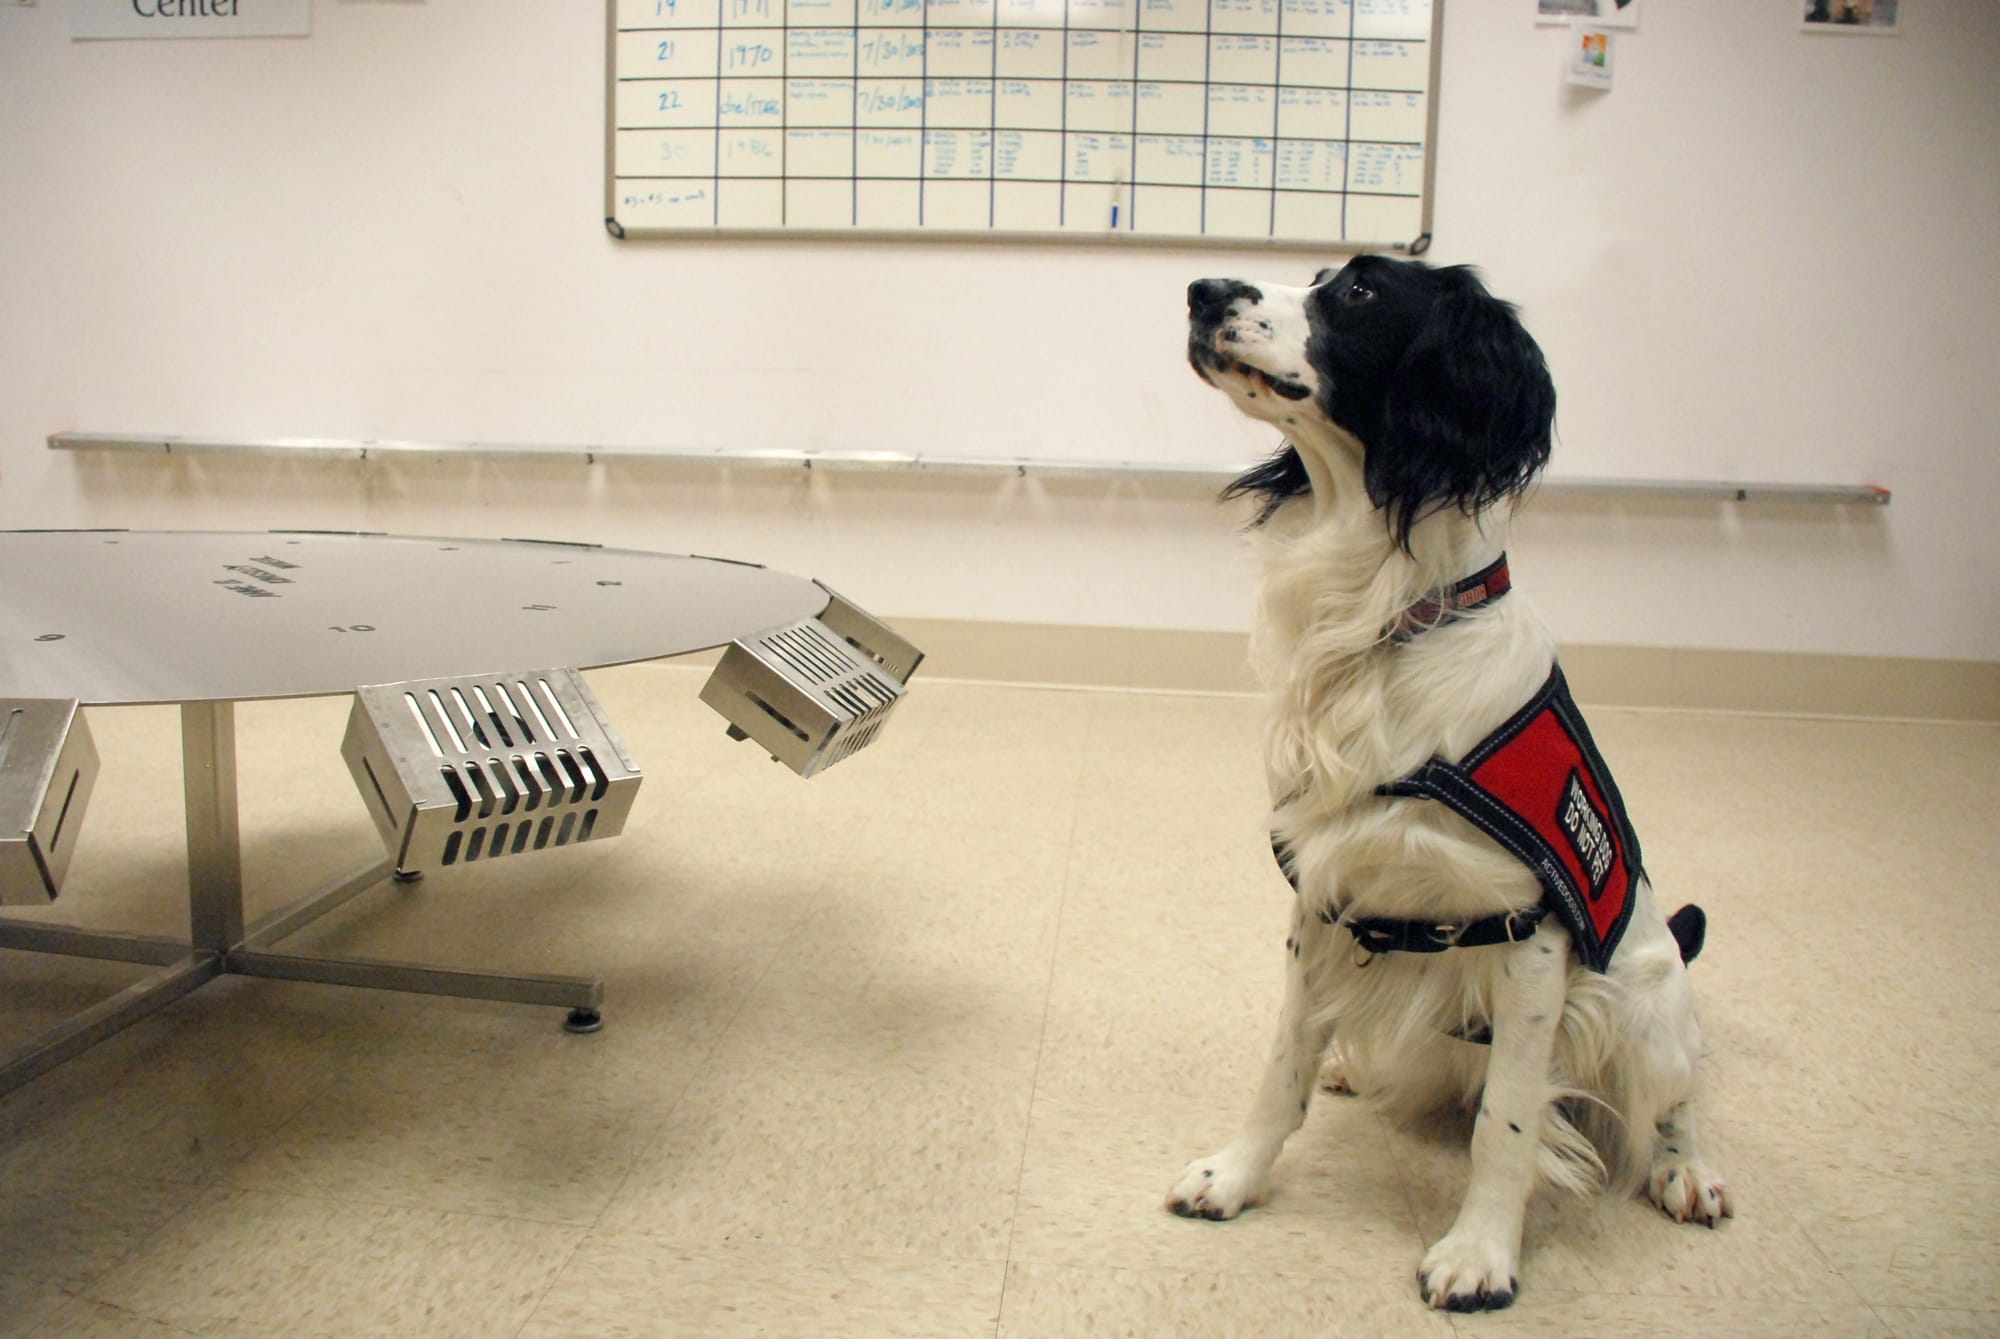 University of Pennsylvania Veterinary School
Cancer detection dog McBaine, seen this month at the University of Pennsylvania Veterinary School, is trained to sniff out the odors that indicate a woman has ovarian cancer, a disease that has no effective test for early detection.